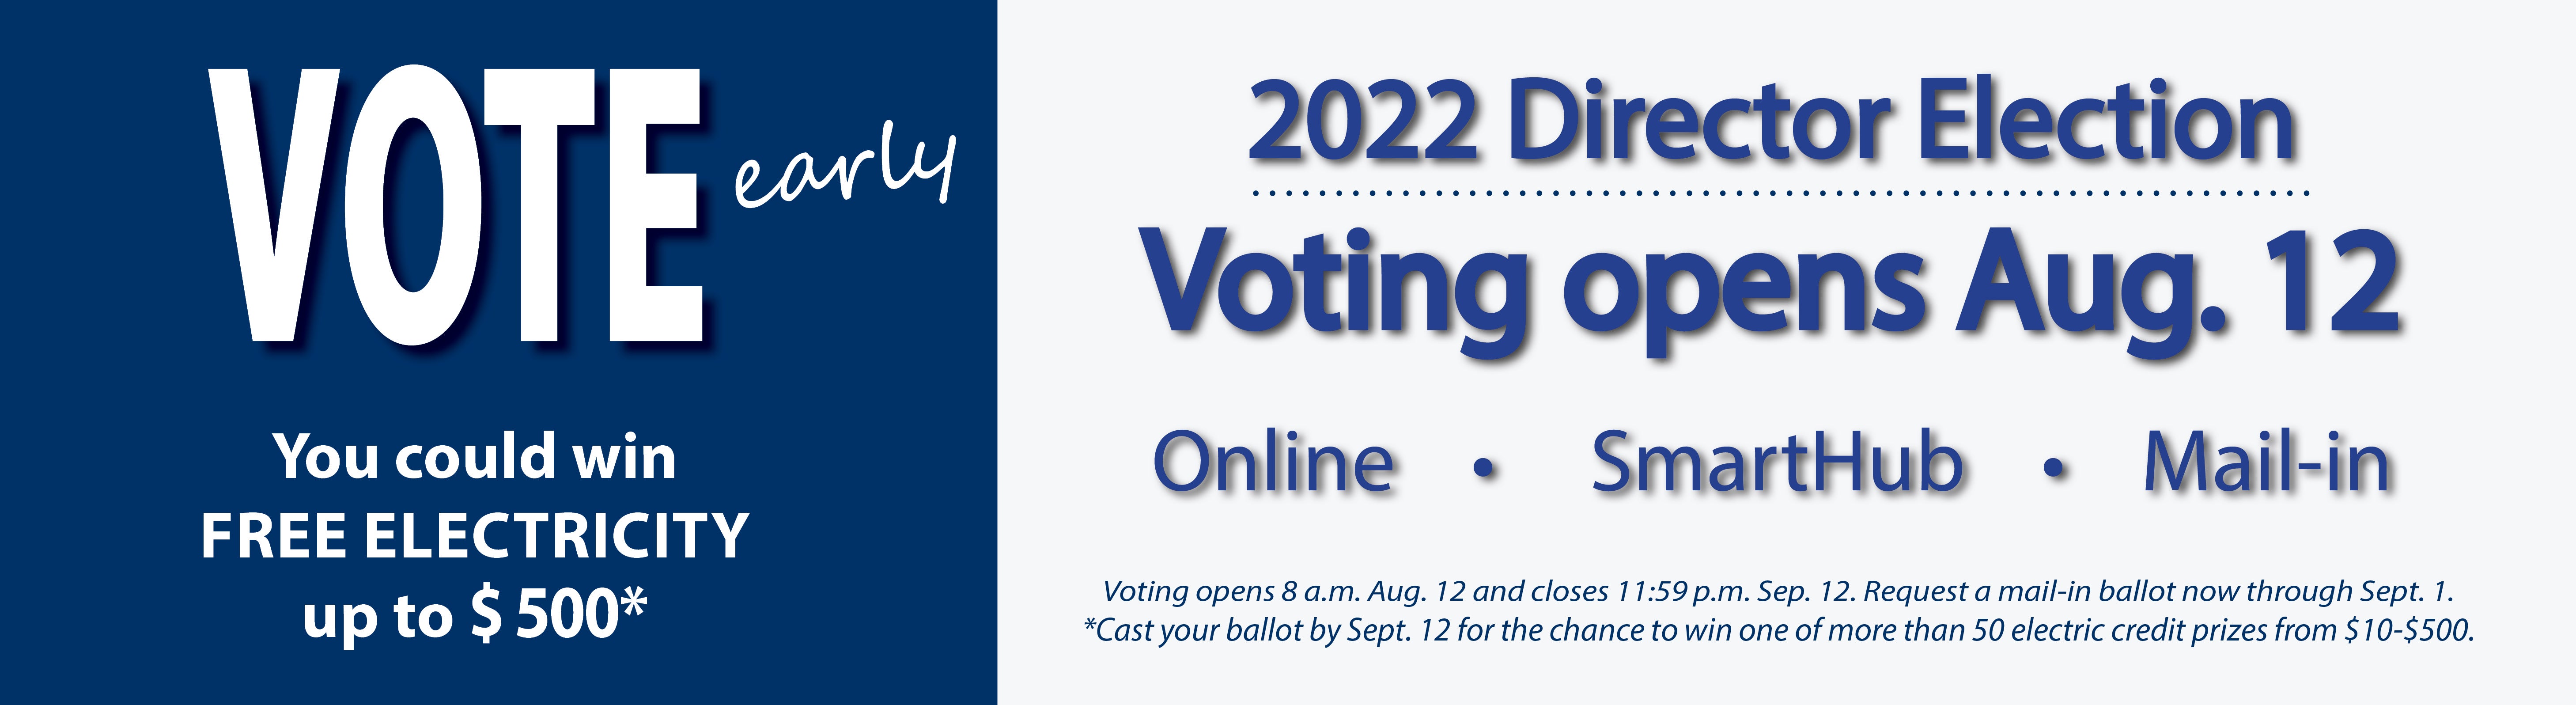 Vote early in the 2022 director election